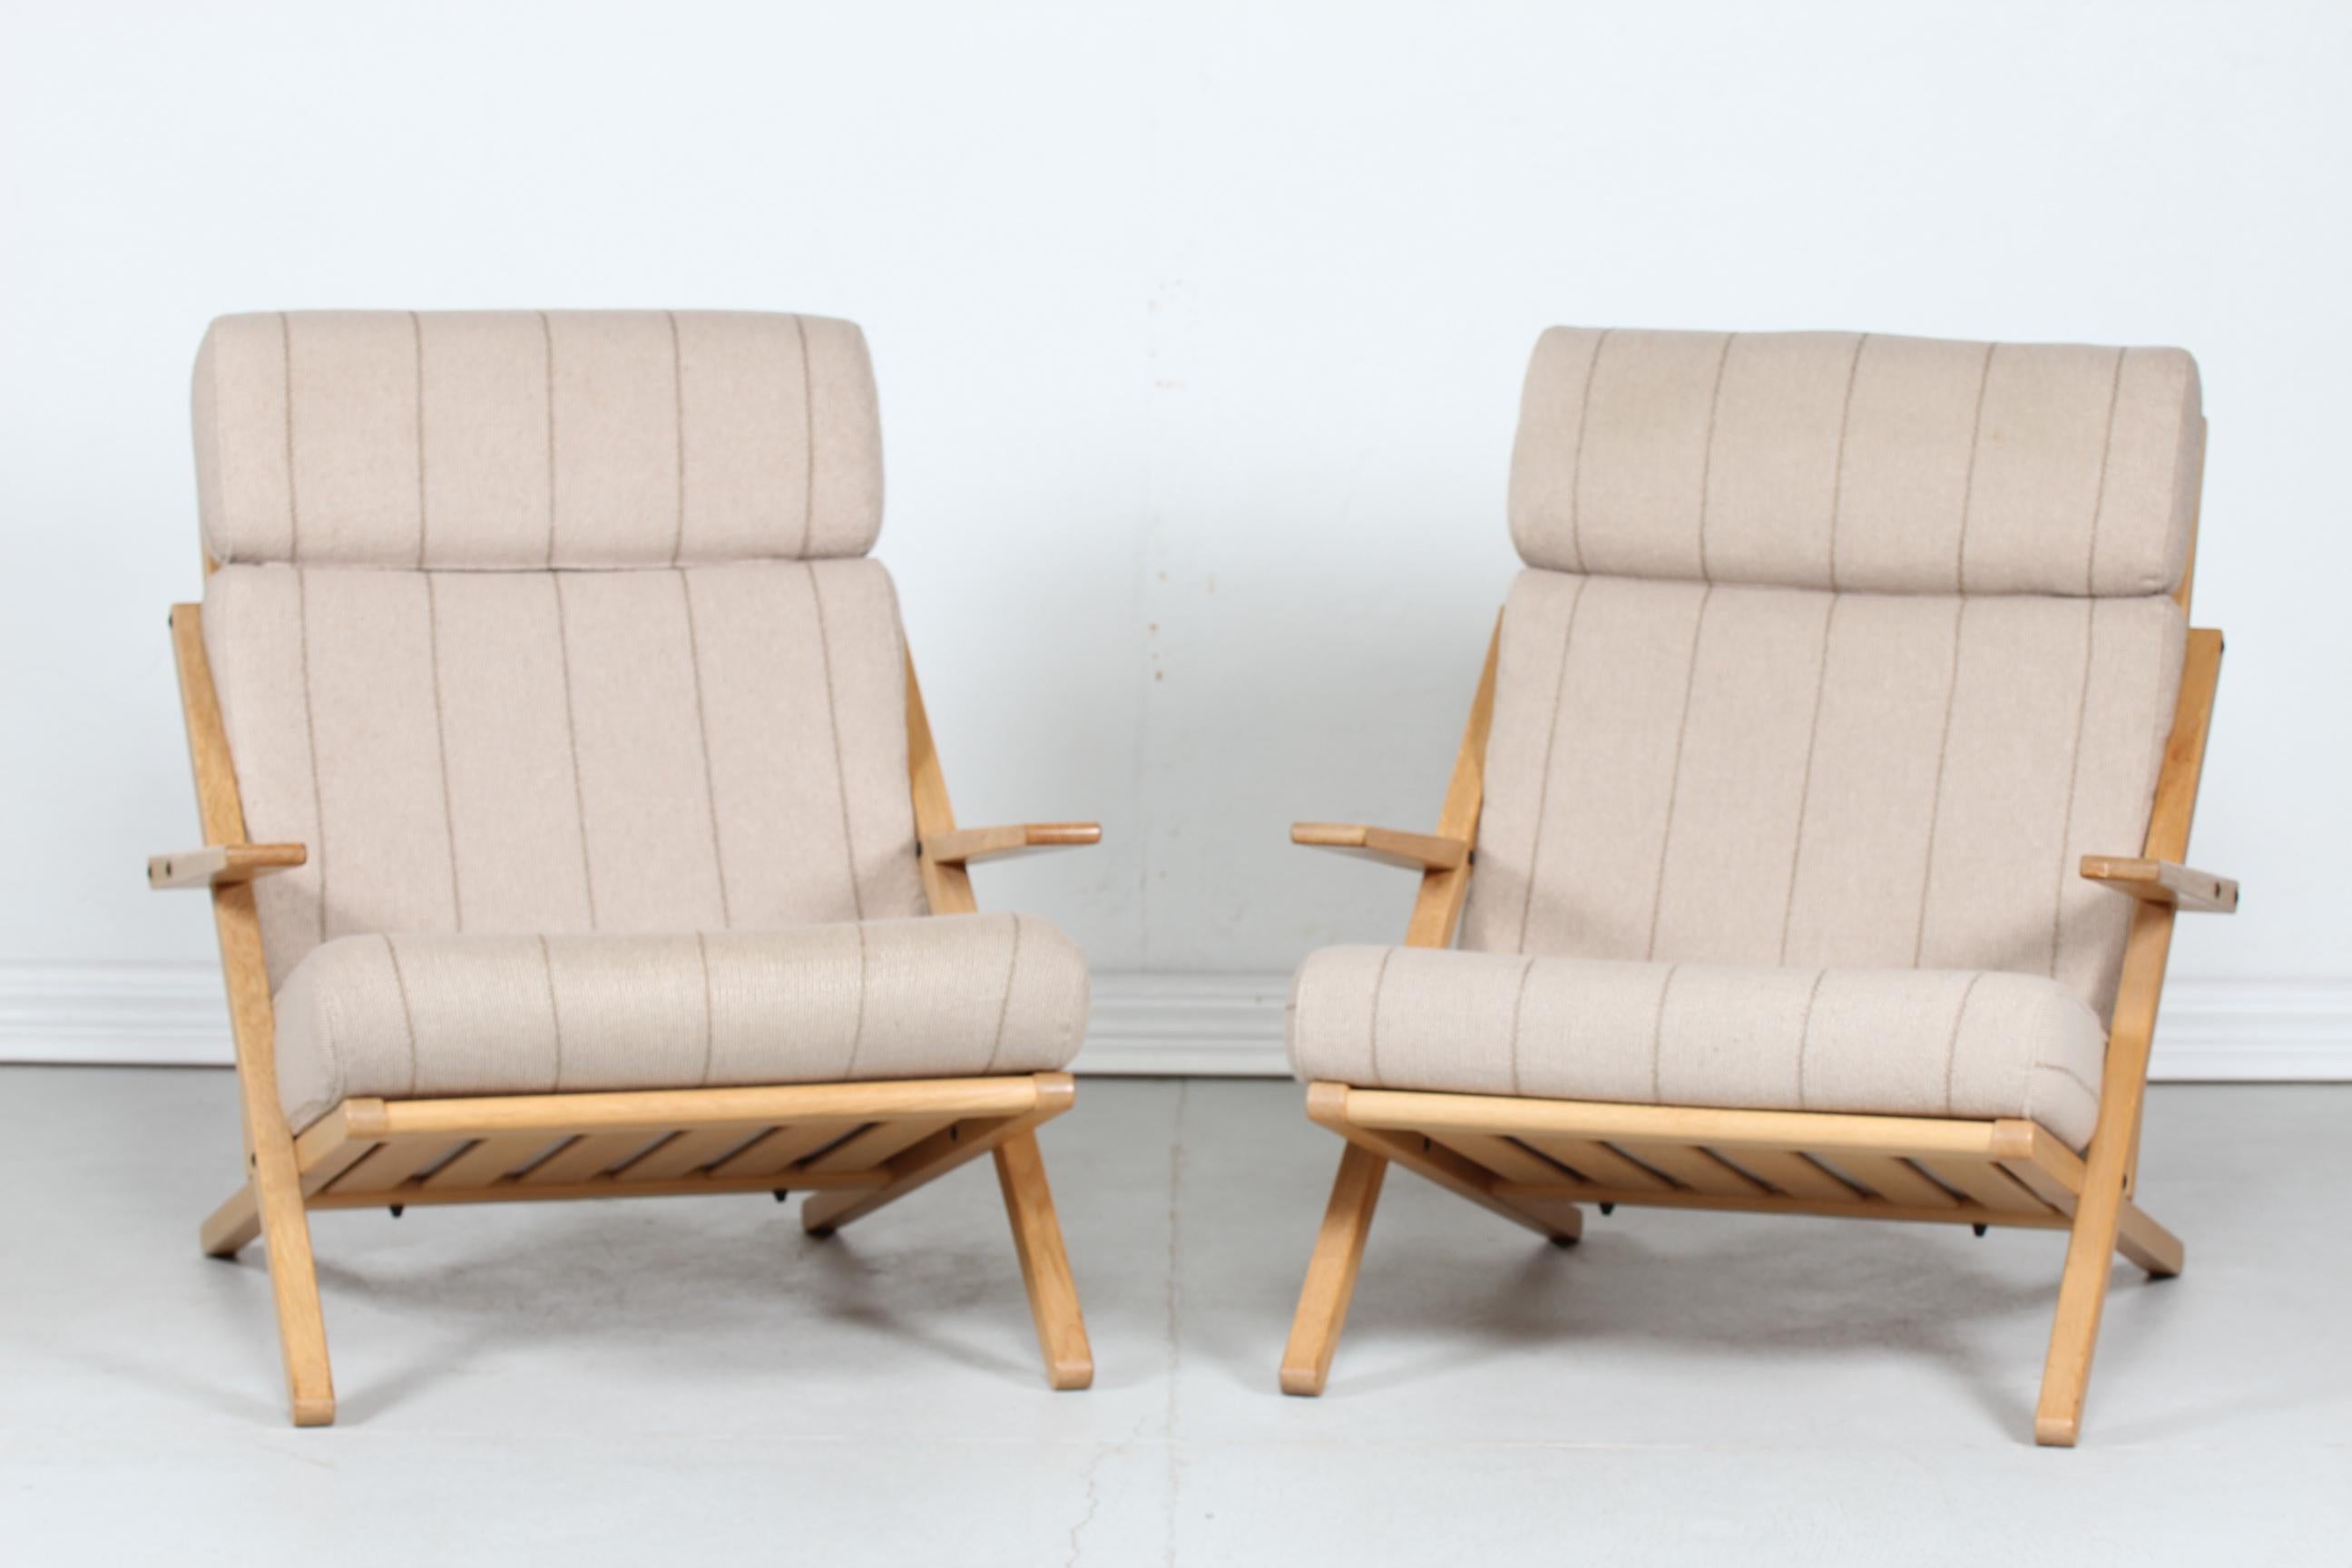 Pair of Danish modern lounge chairs or easy chairs manufactured by C. F. Christensen, Silkeborg, Denmark.
The chairs are made of solid oak. with lacquer.
Loose cushions with the original light colored fabric with stripes.

Nice vintage condition